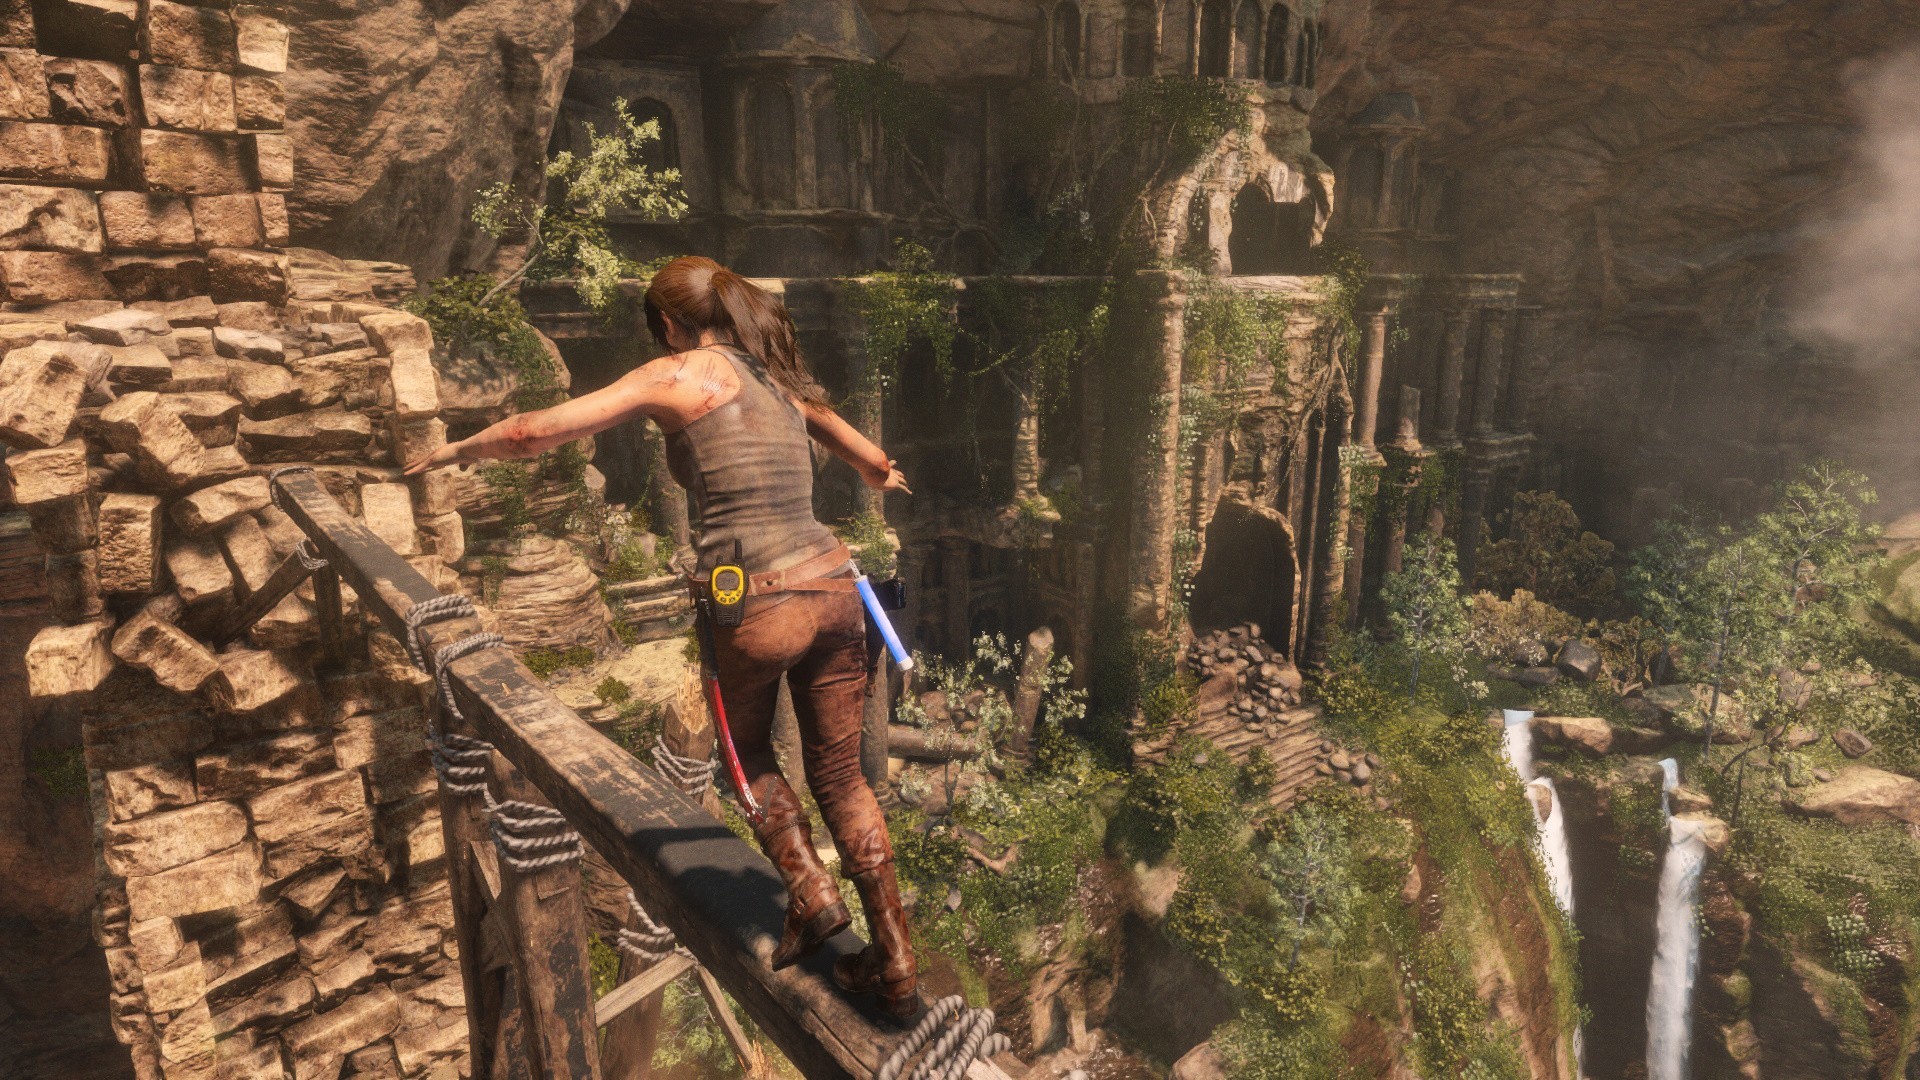 rise of tomb raider requirements